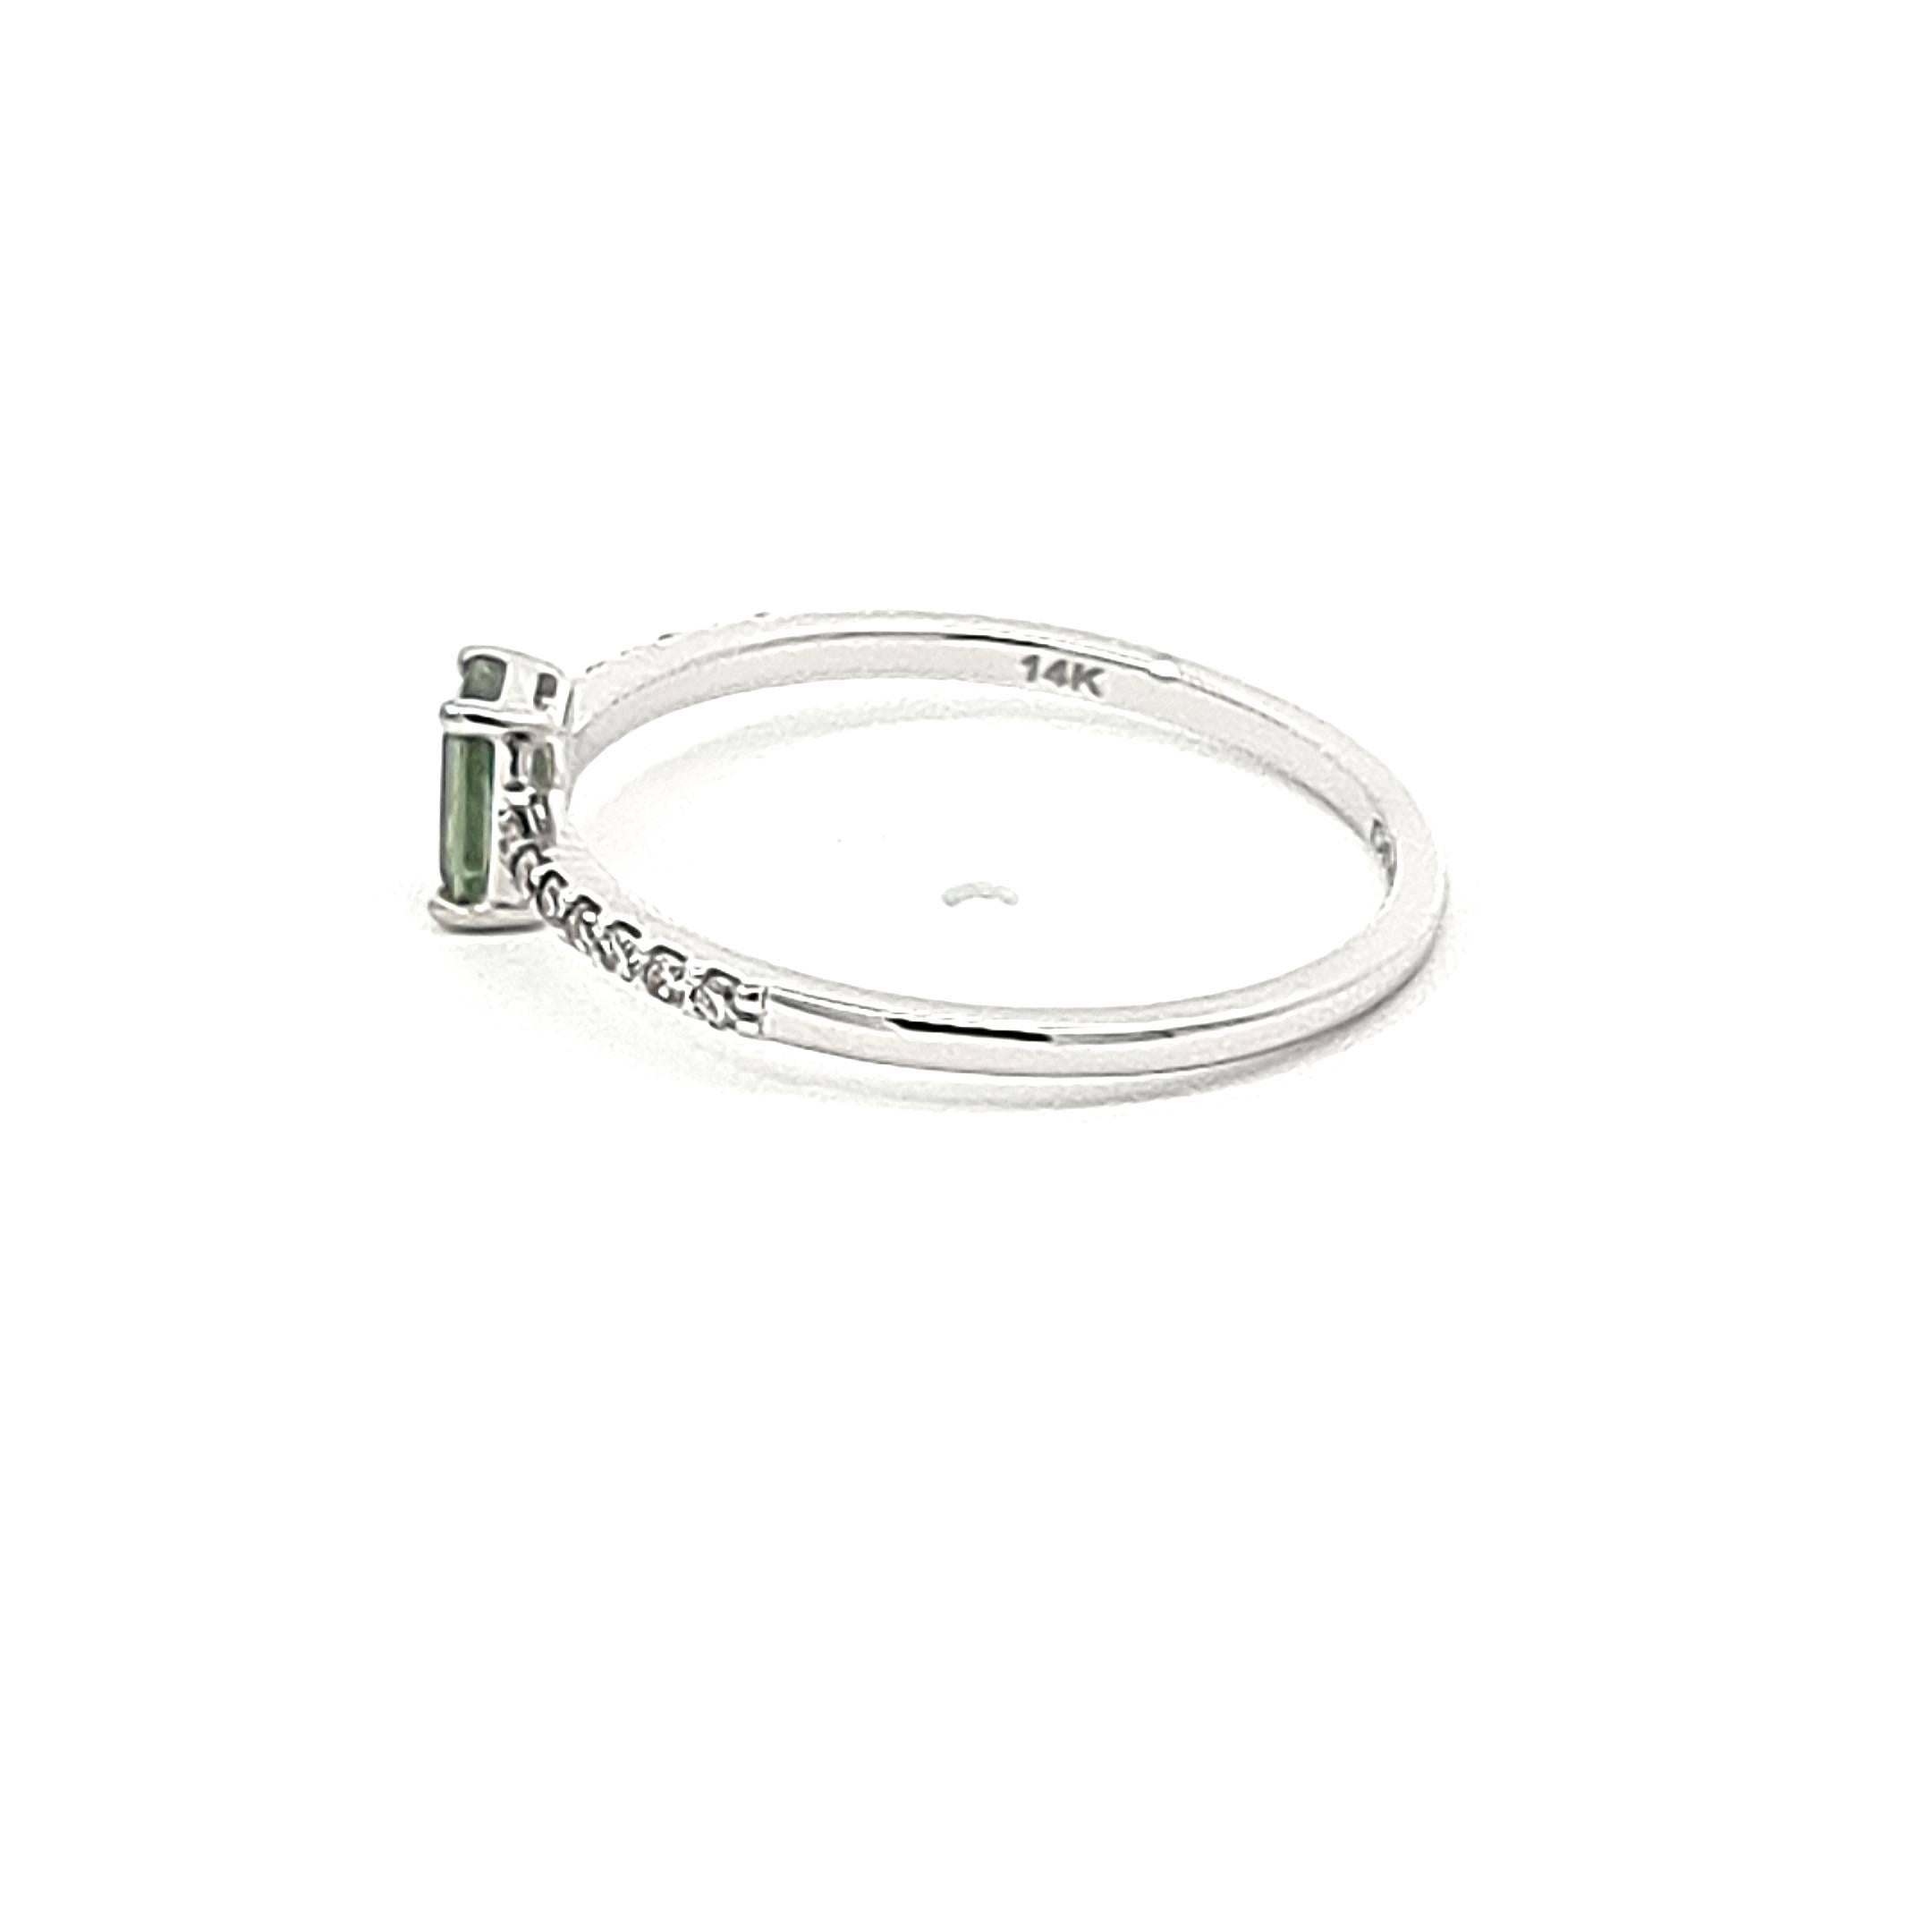 Embrace the allure of our 14K White Gold Ring, a captivating fusion of charm and sophistication. At its core, a vivid emerald-cut green sapphire steals the spotlight, a lush 0.37-carat gem radiating with natural elegance. The sides of the shank are